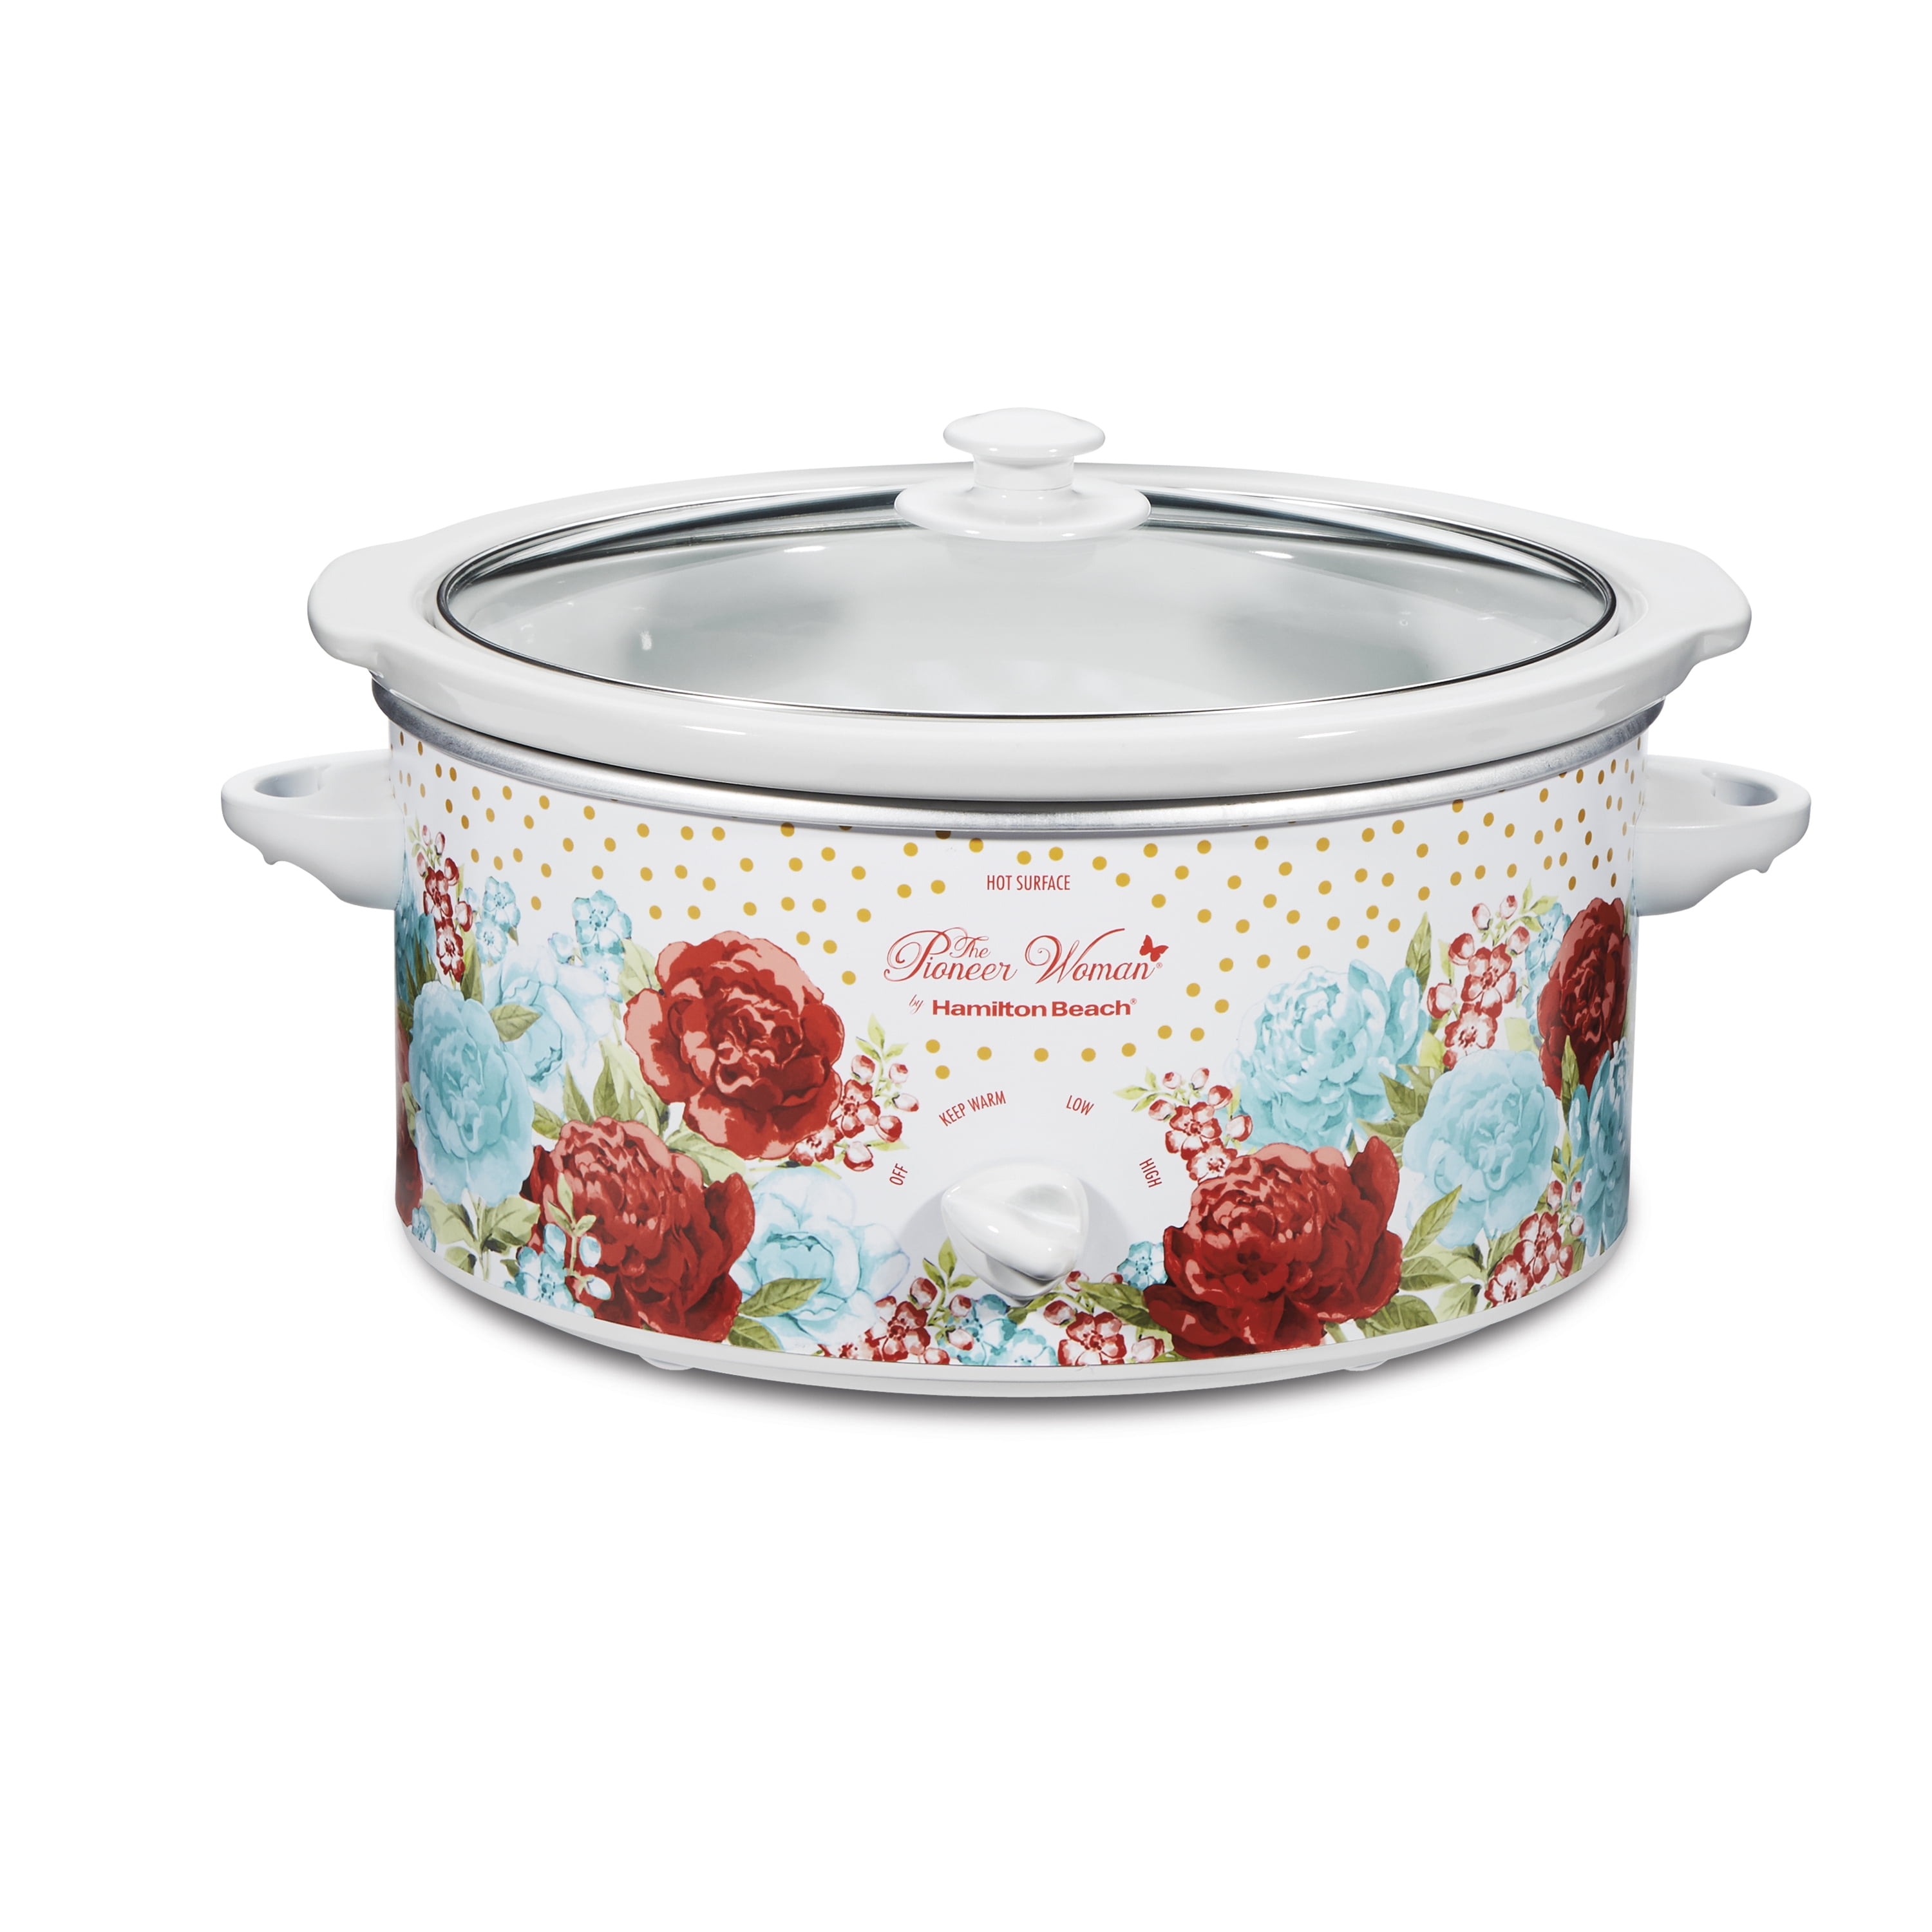 The Pioneer Woman 1.5 Quart Slow Cooker (Set of 2), Frugal Buzz